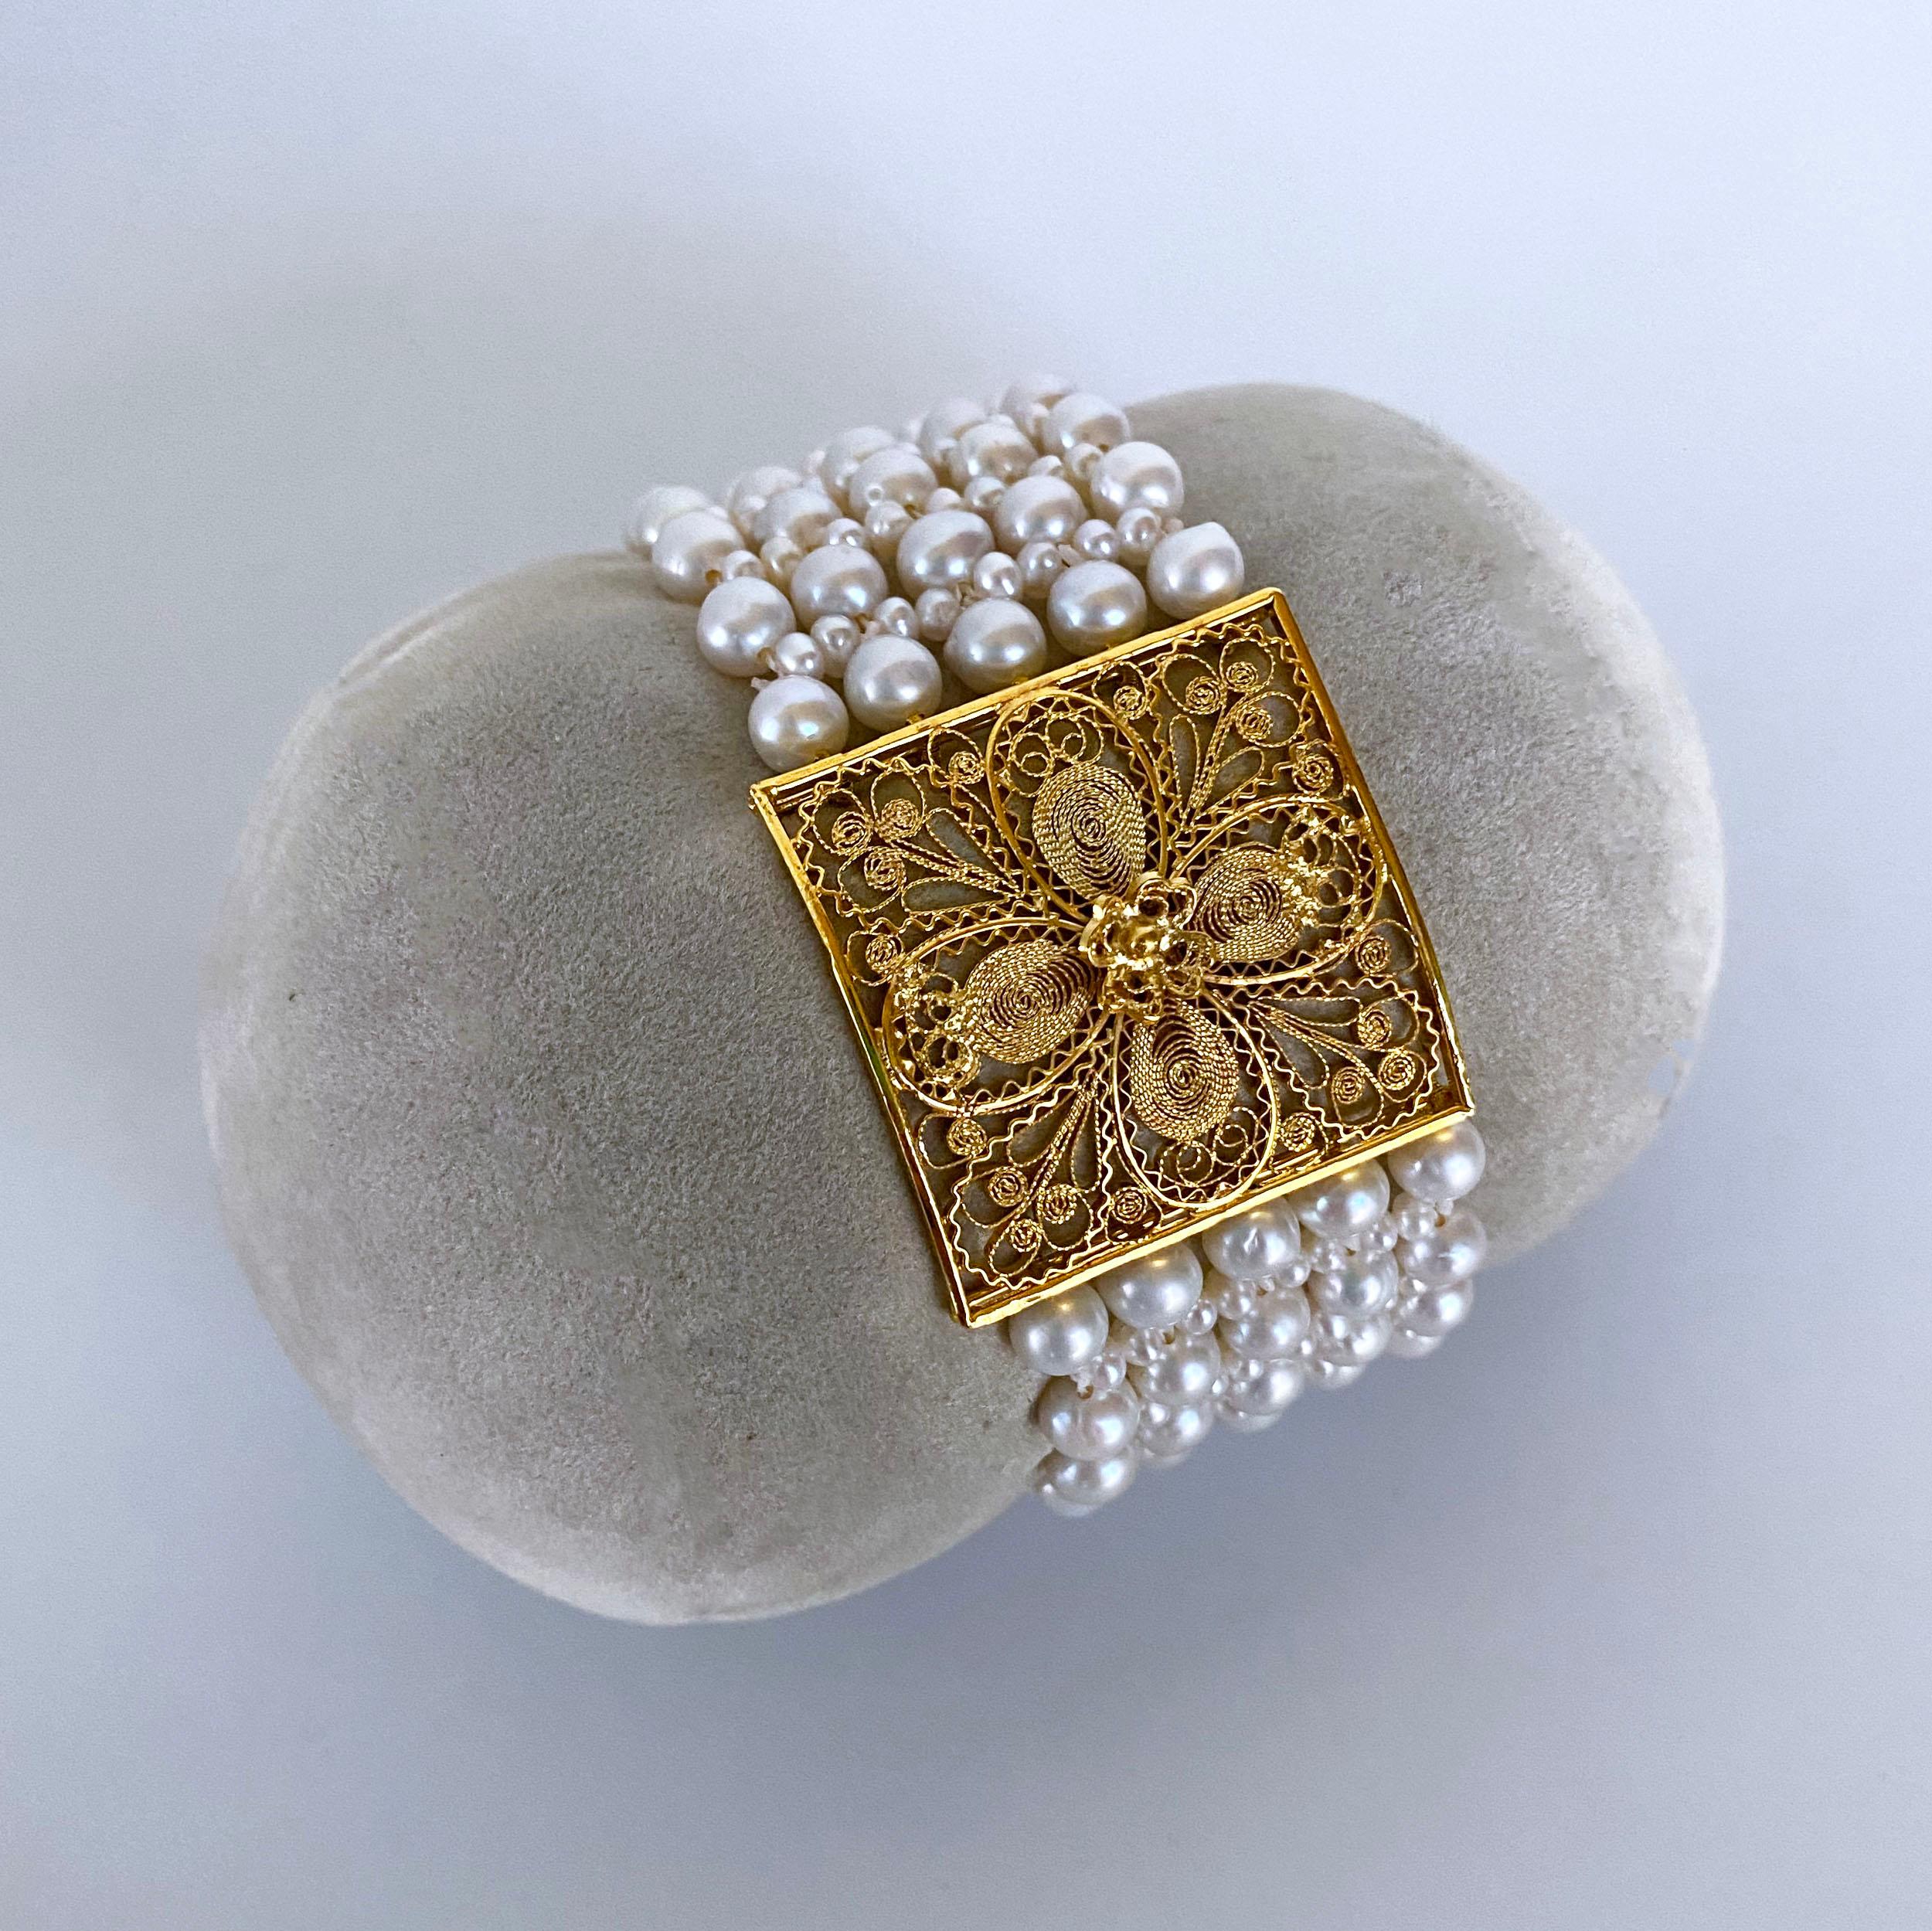 Gorgeous One of A Kind piece by Marina J. This bracelet is made of multi sized cultured white Pearls all intricately woven together into a fine lace like design. This piece features a Floral Filigree Square 18k Yellow Gold Plated Silver Centerpiece.